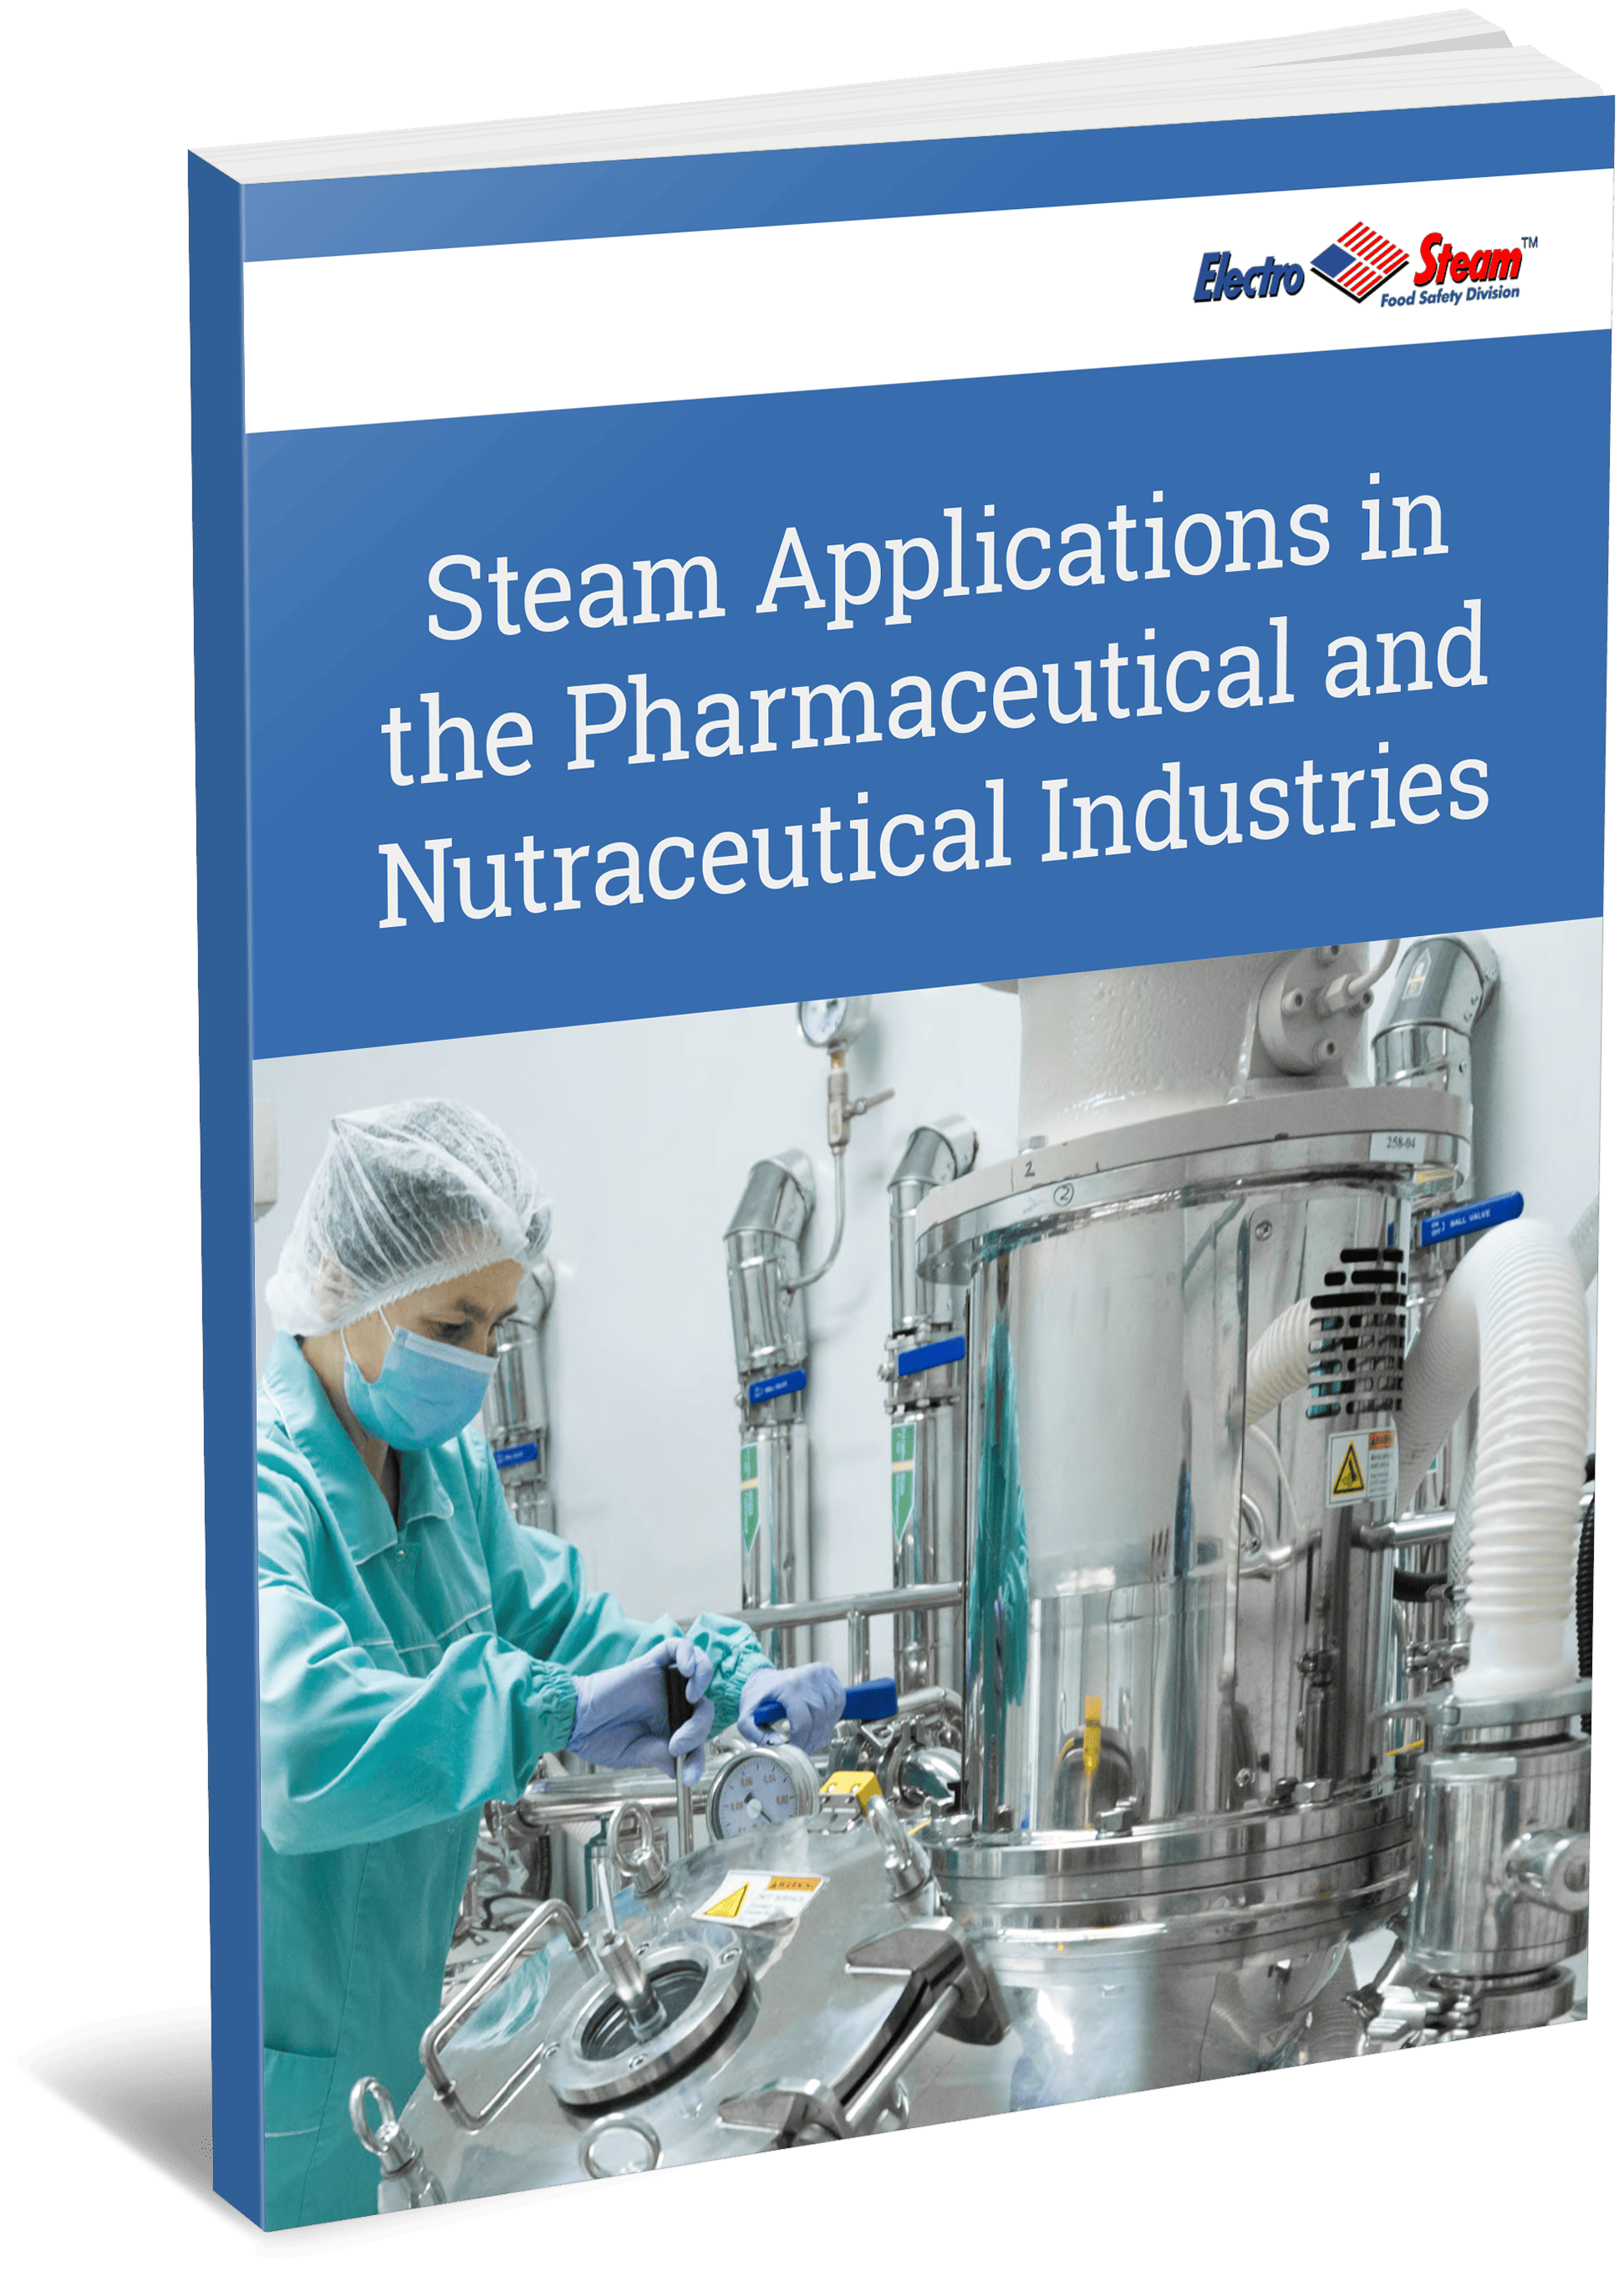 Steam Applications in the Pharmaceutical and Nutraceutical Industries